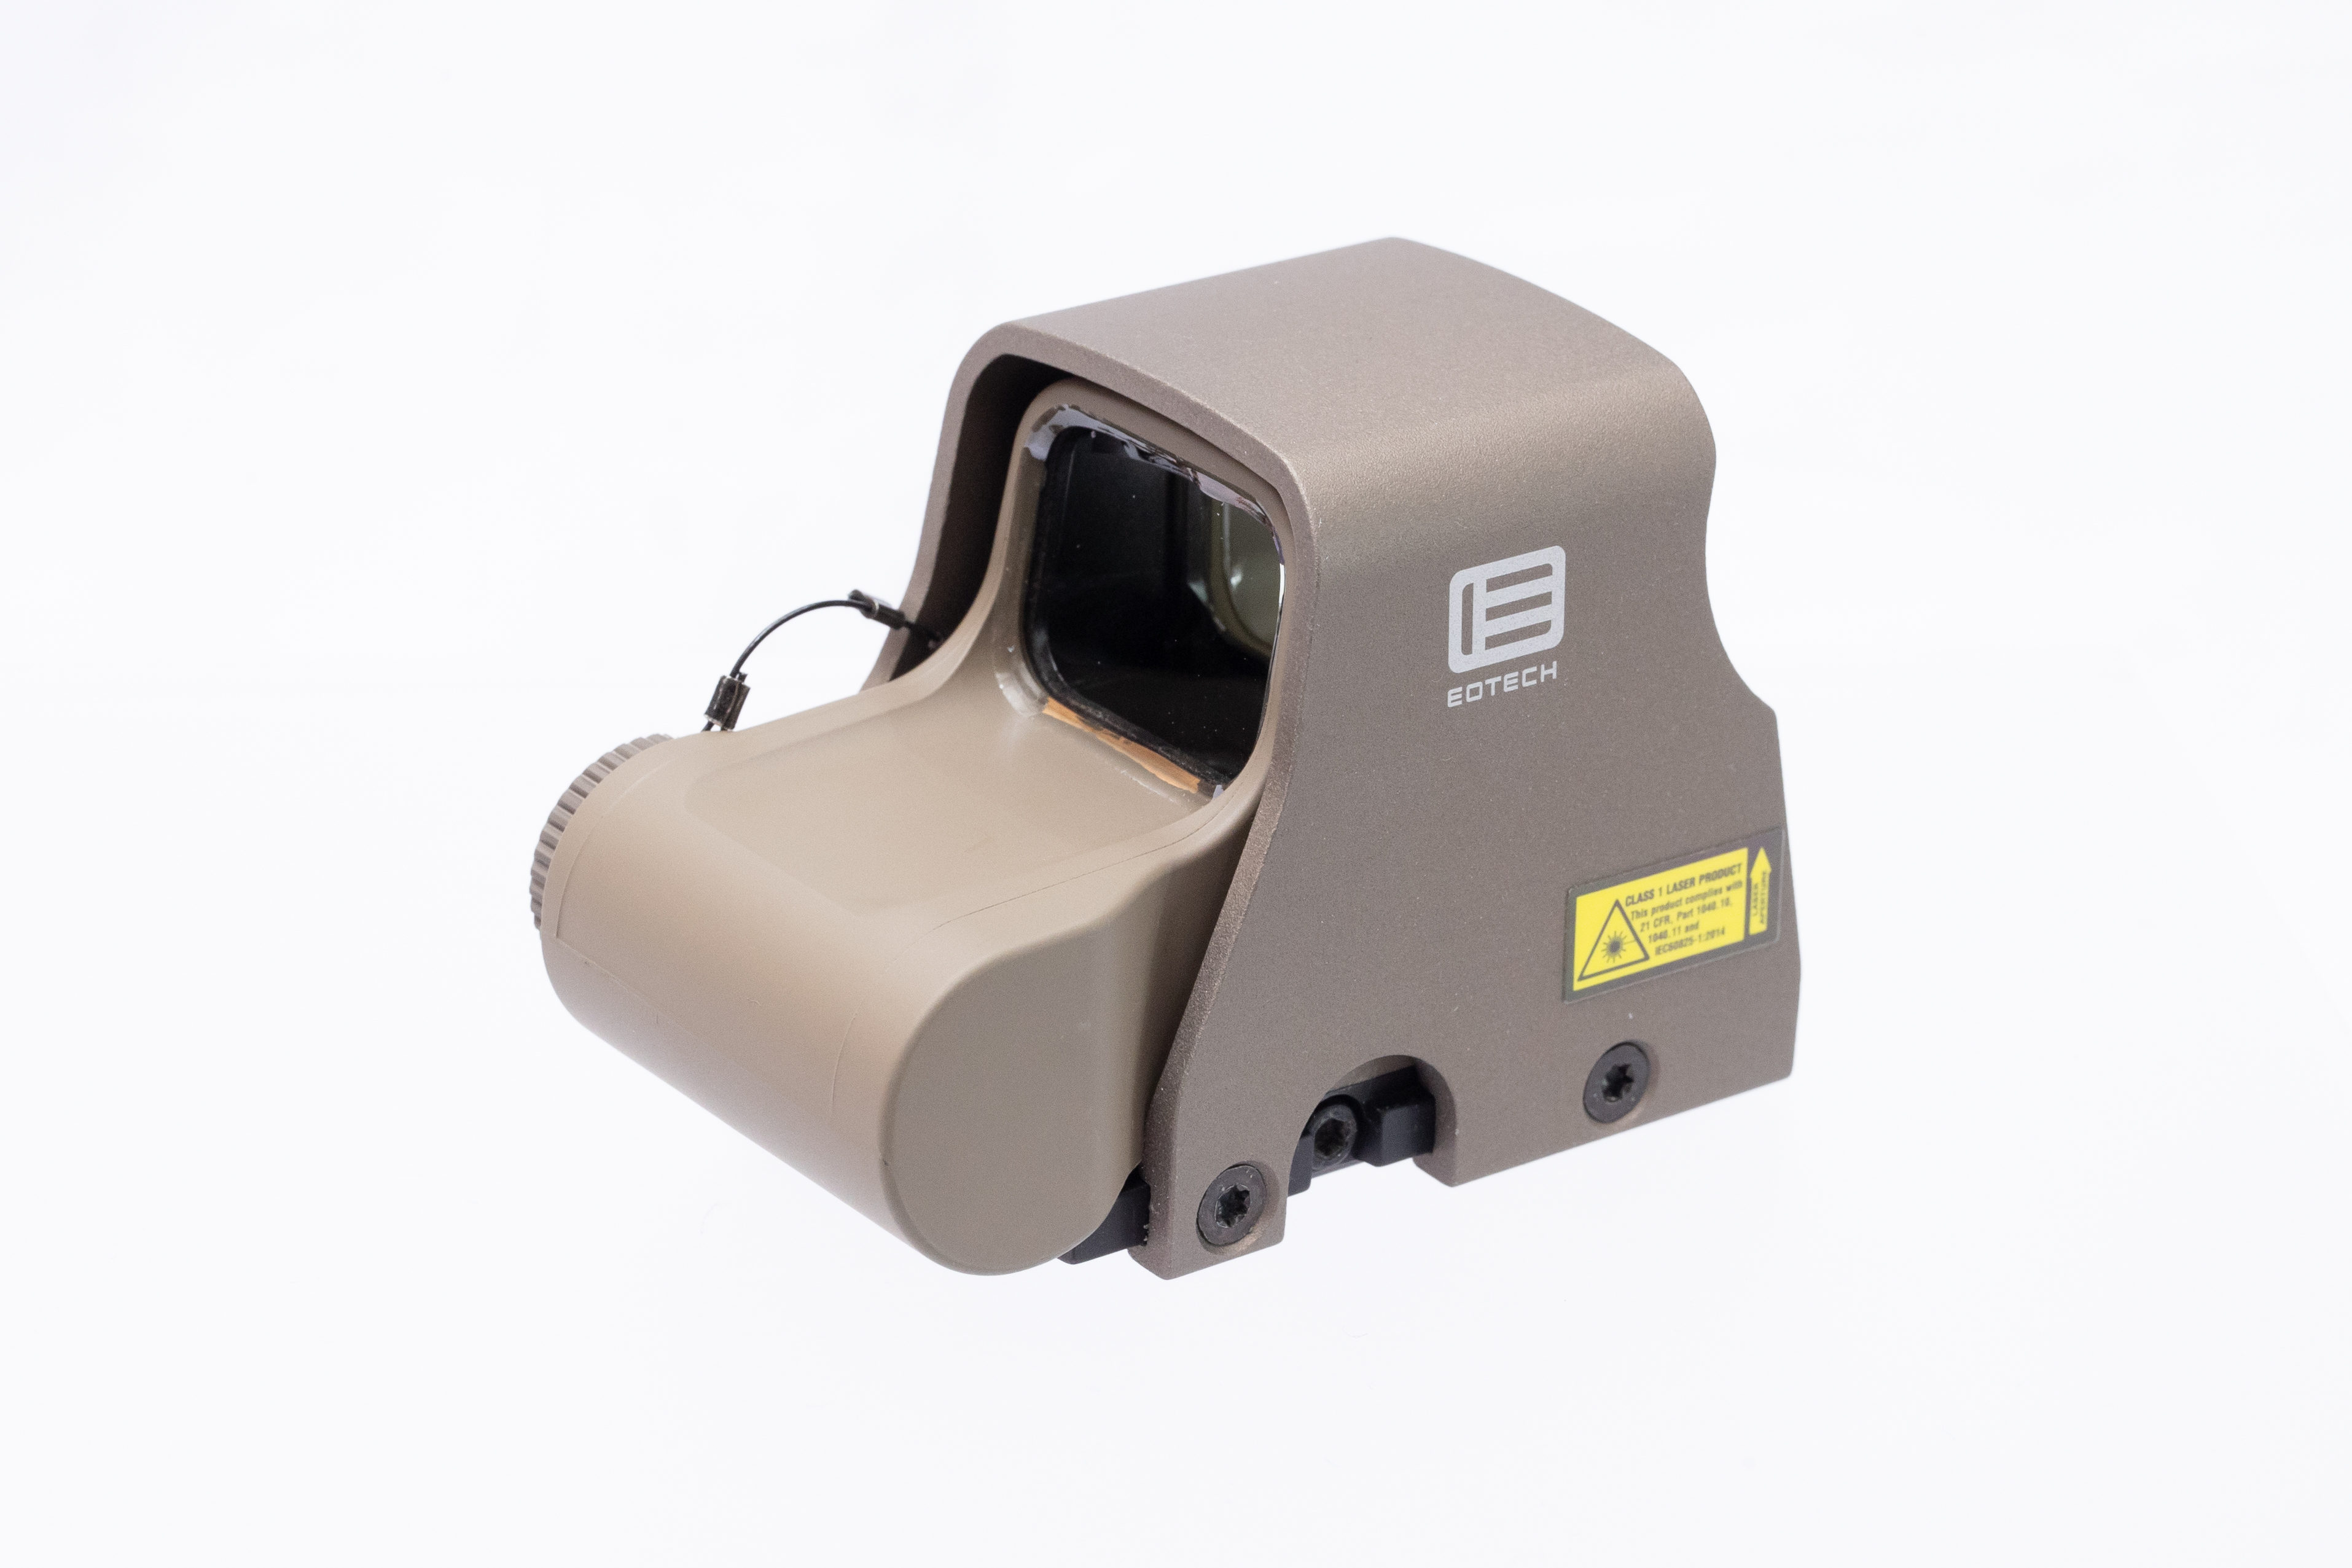 AIRSOFT97 沖縄本店 通販部 / 【実物】EoTech EXPS3-2 TAN ホロサイト